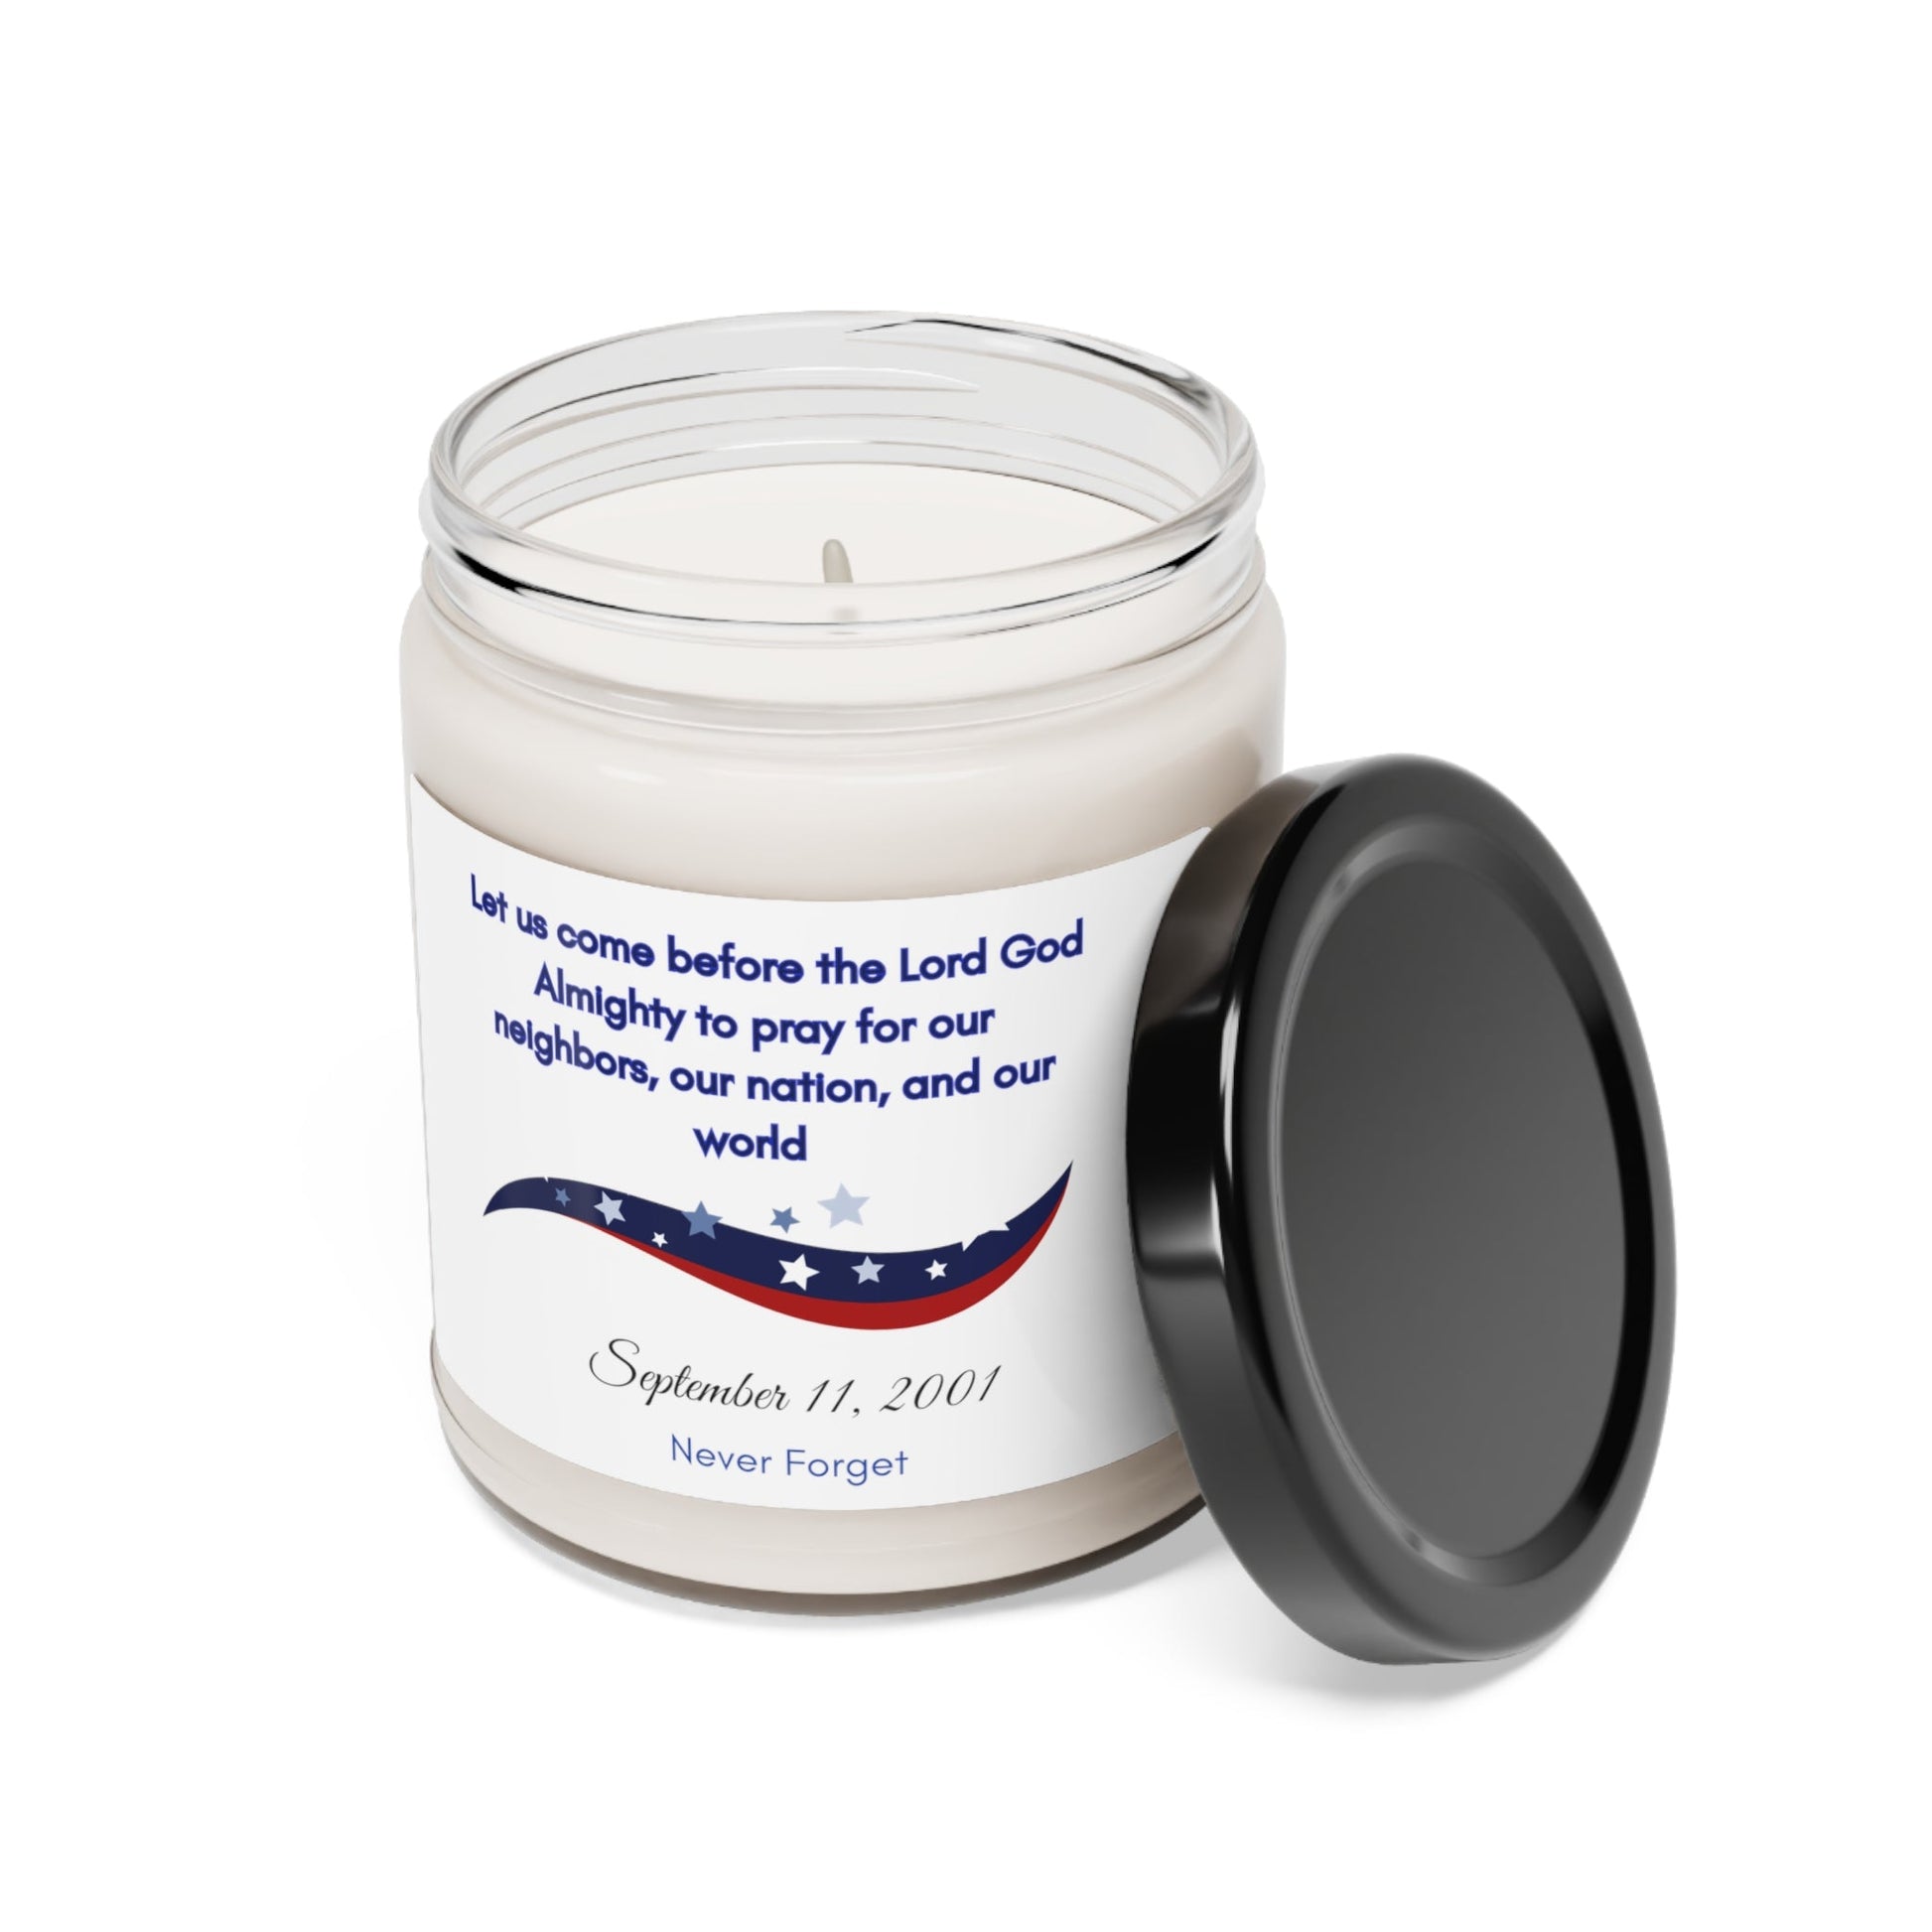 Get trendy with September 11 Remembrance prayer Scented Soy Candle, 9oz - Home Decor available at Good Gift Company. Grab yours for $16 today!